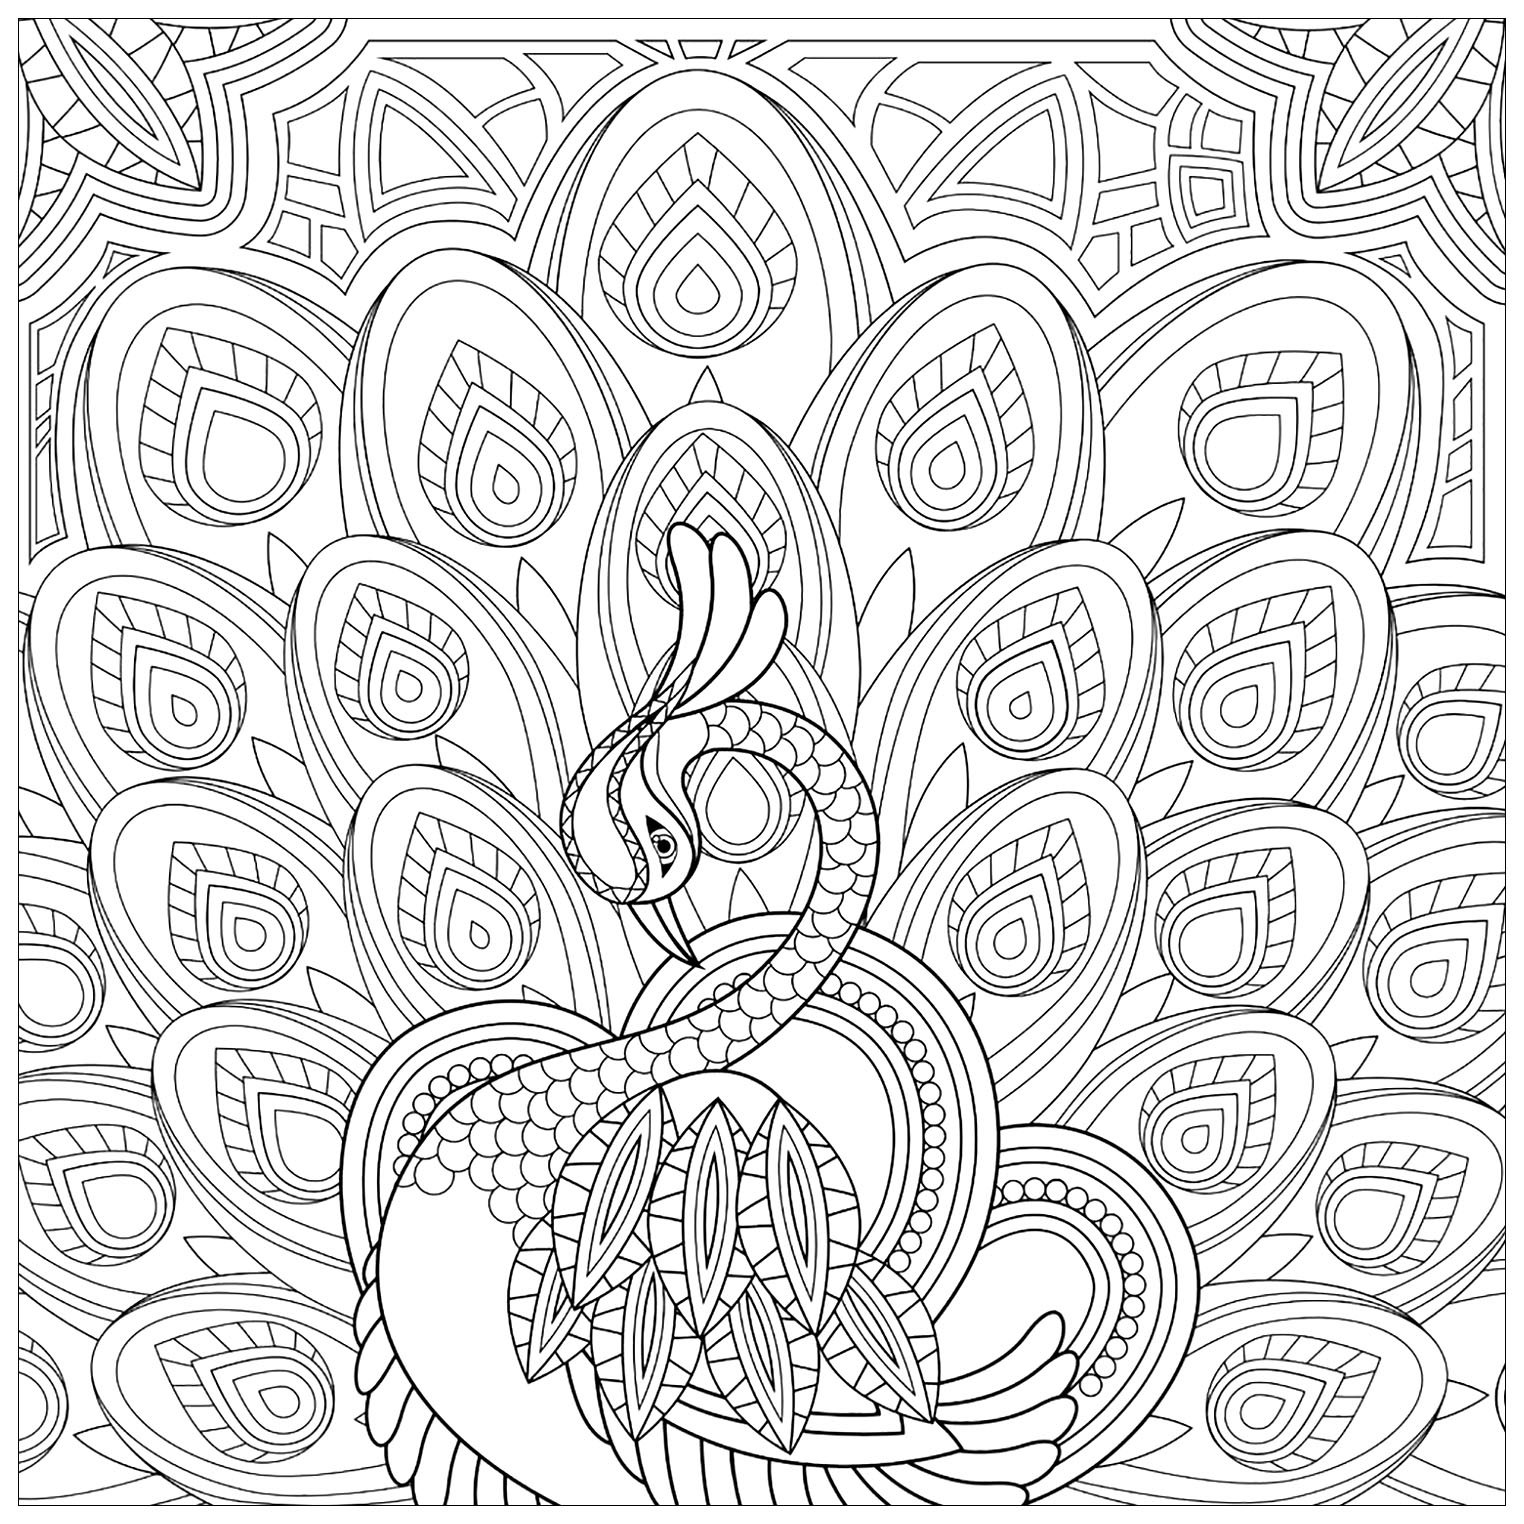 Coloring Pages  Peacocks Free To Color For Children Kids Coloring ...